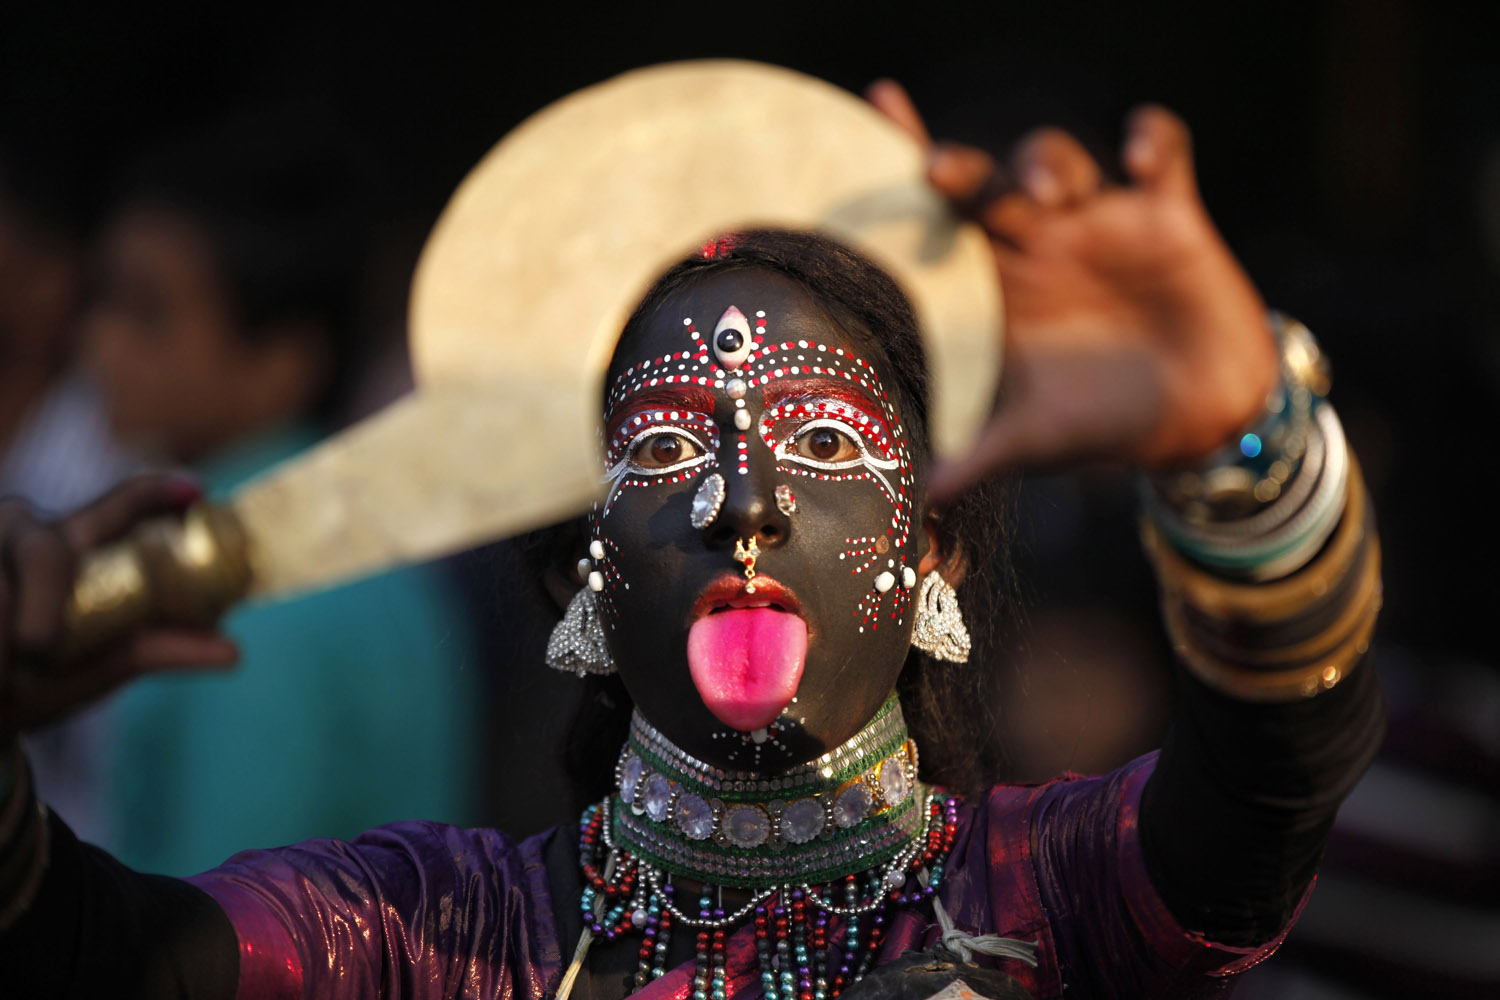 Nov. 20, 2013. A folk artist from India's northern Uttar Pradesh state performs during a procession held as part of the ongoing all India multilingual short play, folk dance competition and theater seminar in Allahabad, India.